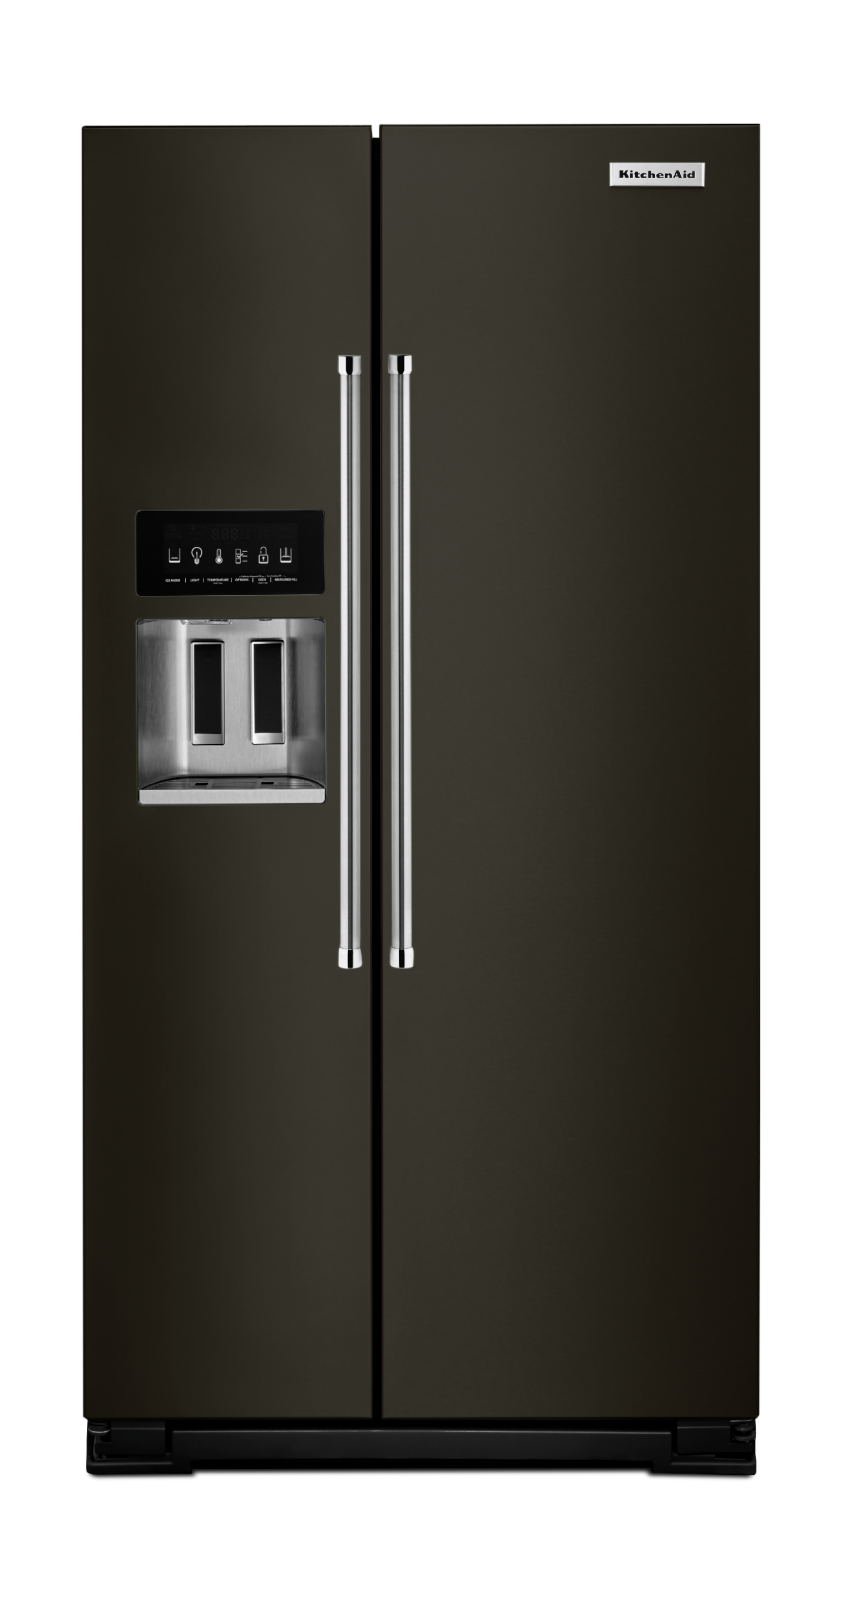 KitchenAid - 35.75 Inch 22.65 cu. ft Side by Side Refrigerator in Black Stainless - KRSC503EBS